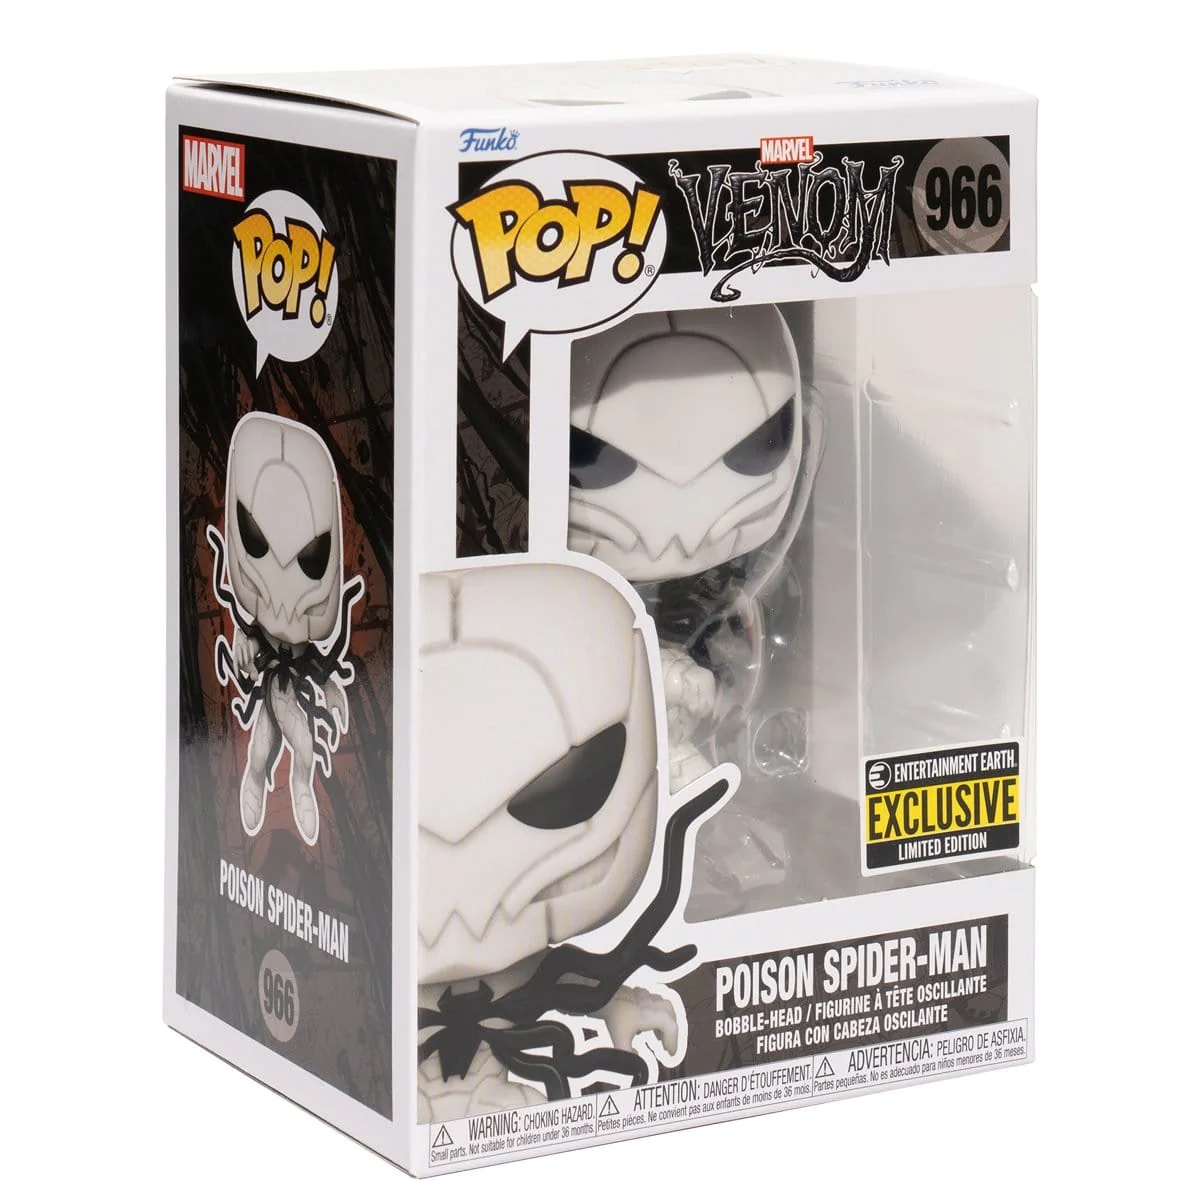 Funko - POP! - Marvel Venom - Poison Spider-Man - Glow Chase - Entertainment Earth Exclusive Limited Edition #966